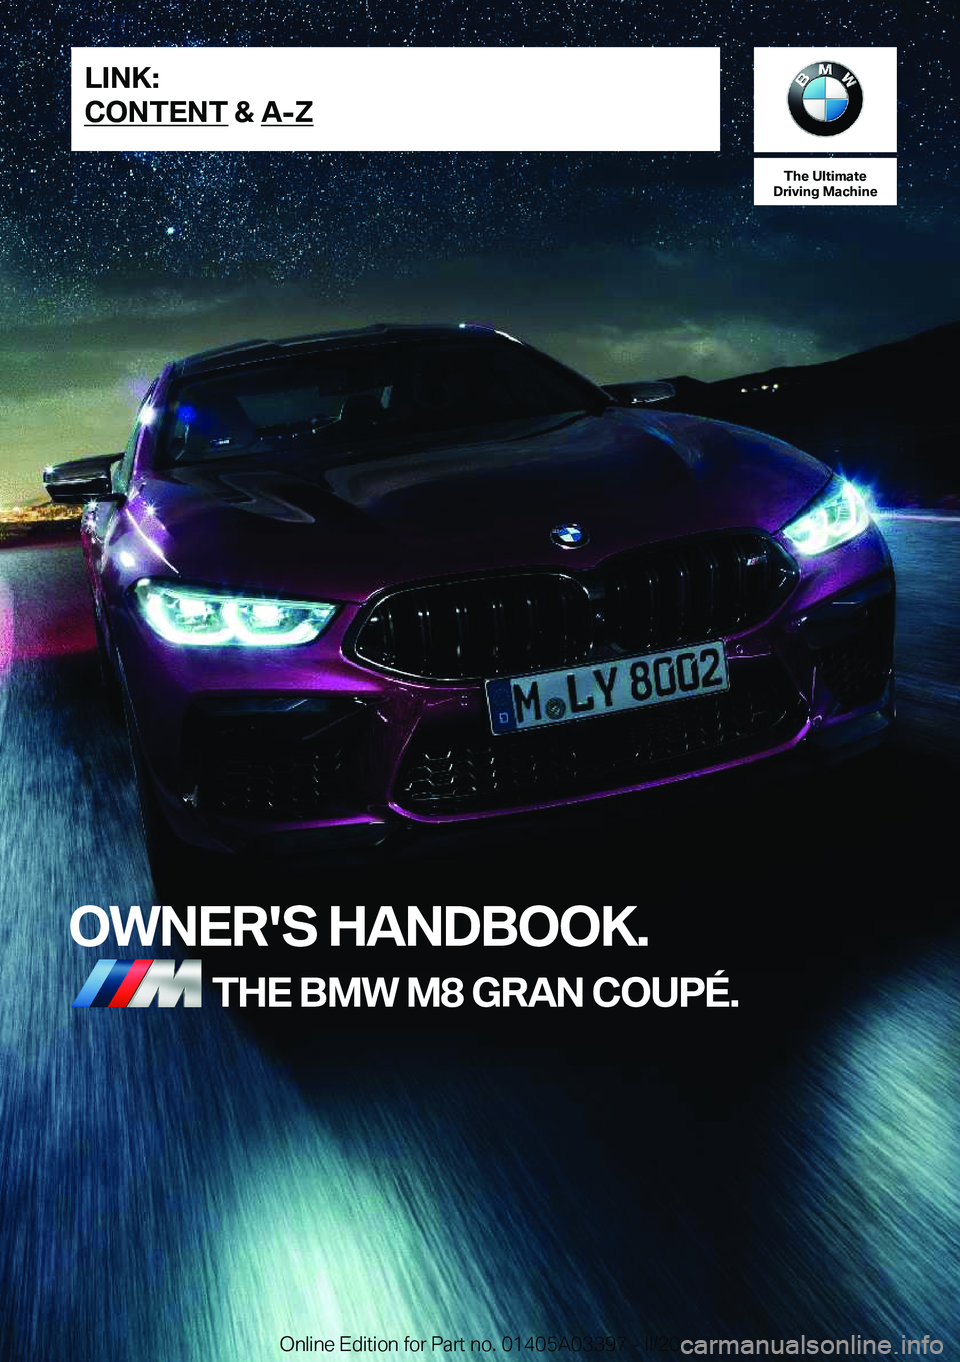 BMW M8 GRAN COUPE 2020  Owners Manual �T�h�e��U�l�t�i�m�a�t�e
�D�r�i�v�i�n�g��M�a�c�h�i�n�e
�O�W�N�E�R�'�S��H�A�N�D�B�O�O�K�.�T�H�E��B�M�W��M�8��G�R�A�N��C�O�U�P�